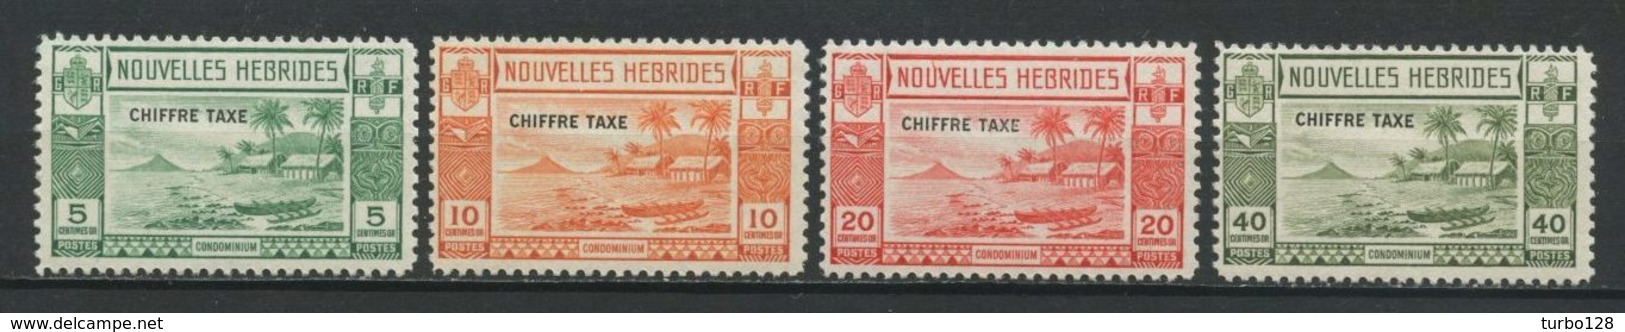 Nlle Hébrides 1938  Taxes N° 11/14 ** Neufs MNH Superbes C 61,60 € Paysage Bateau Pirogue Transports - Strafport